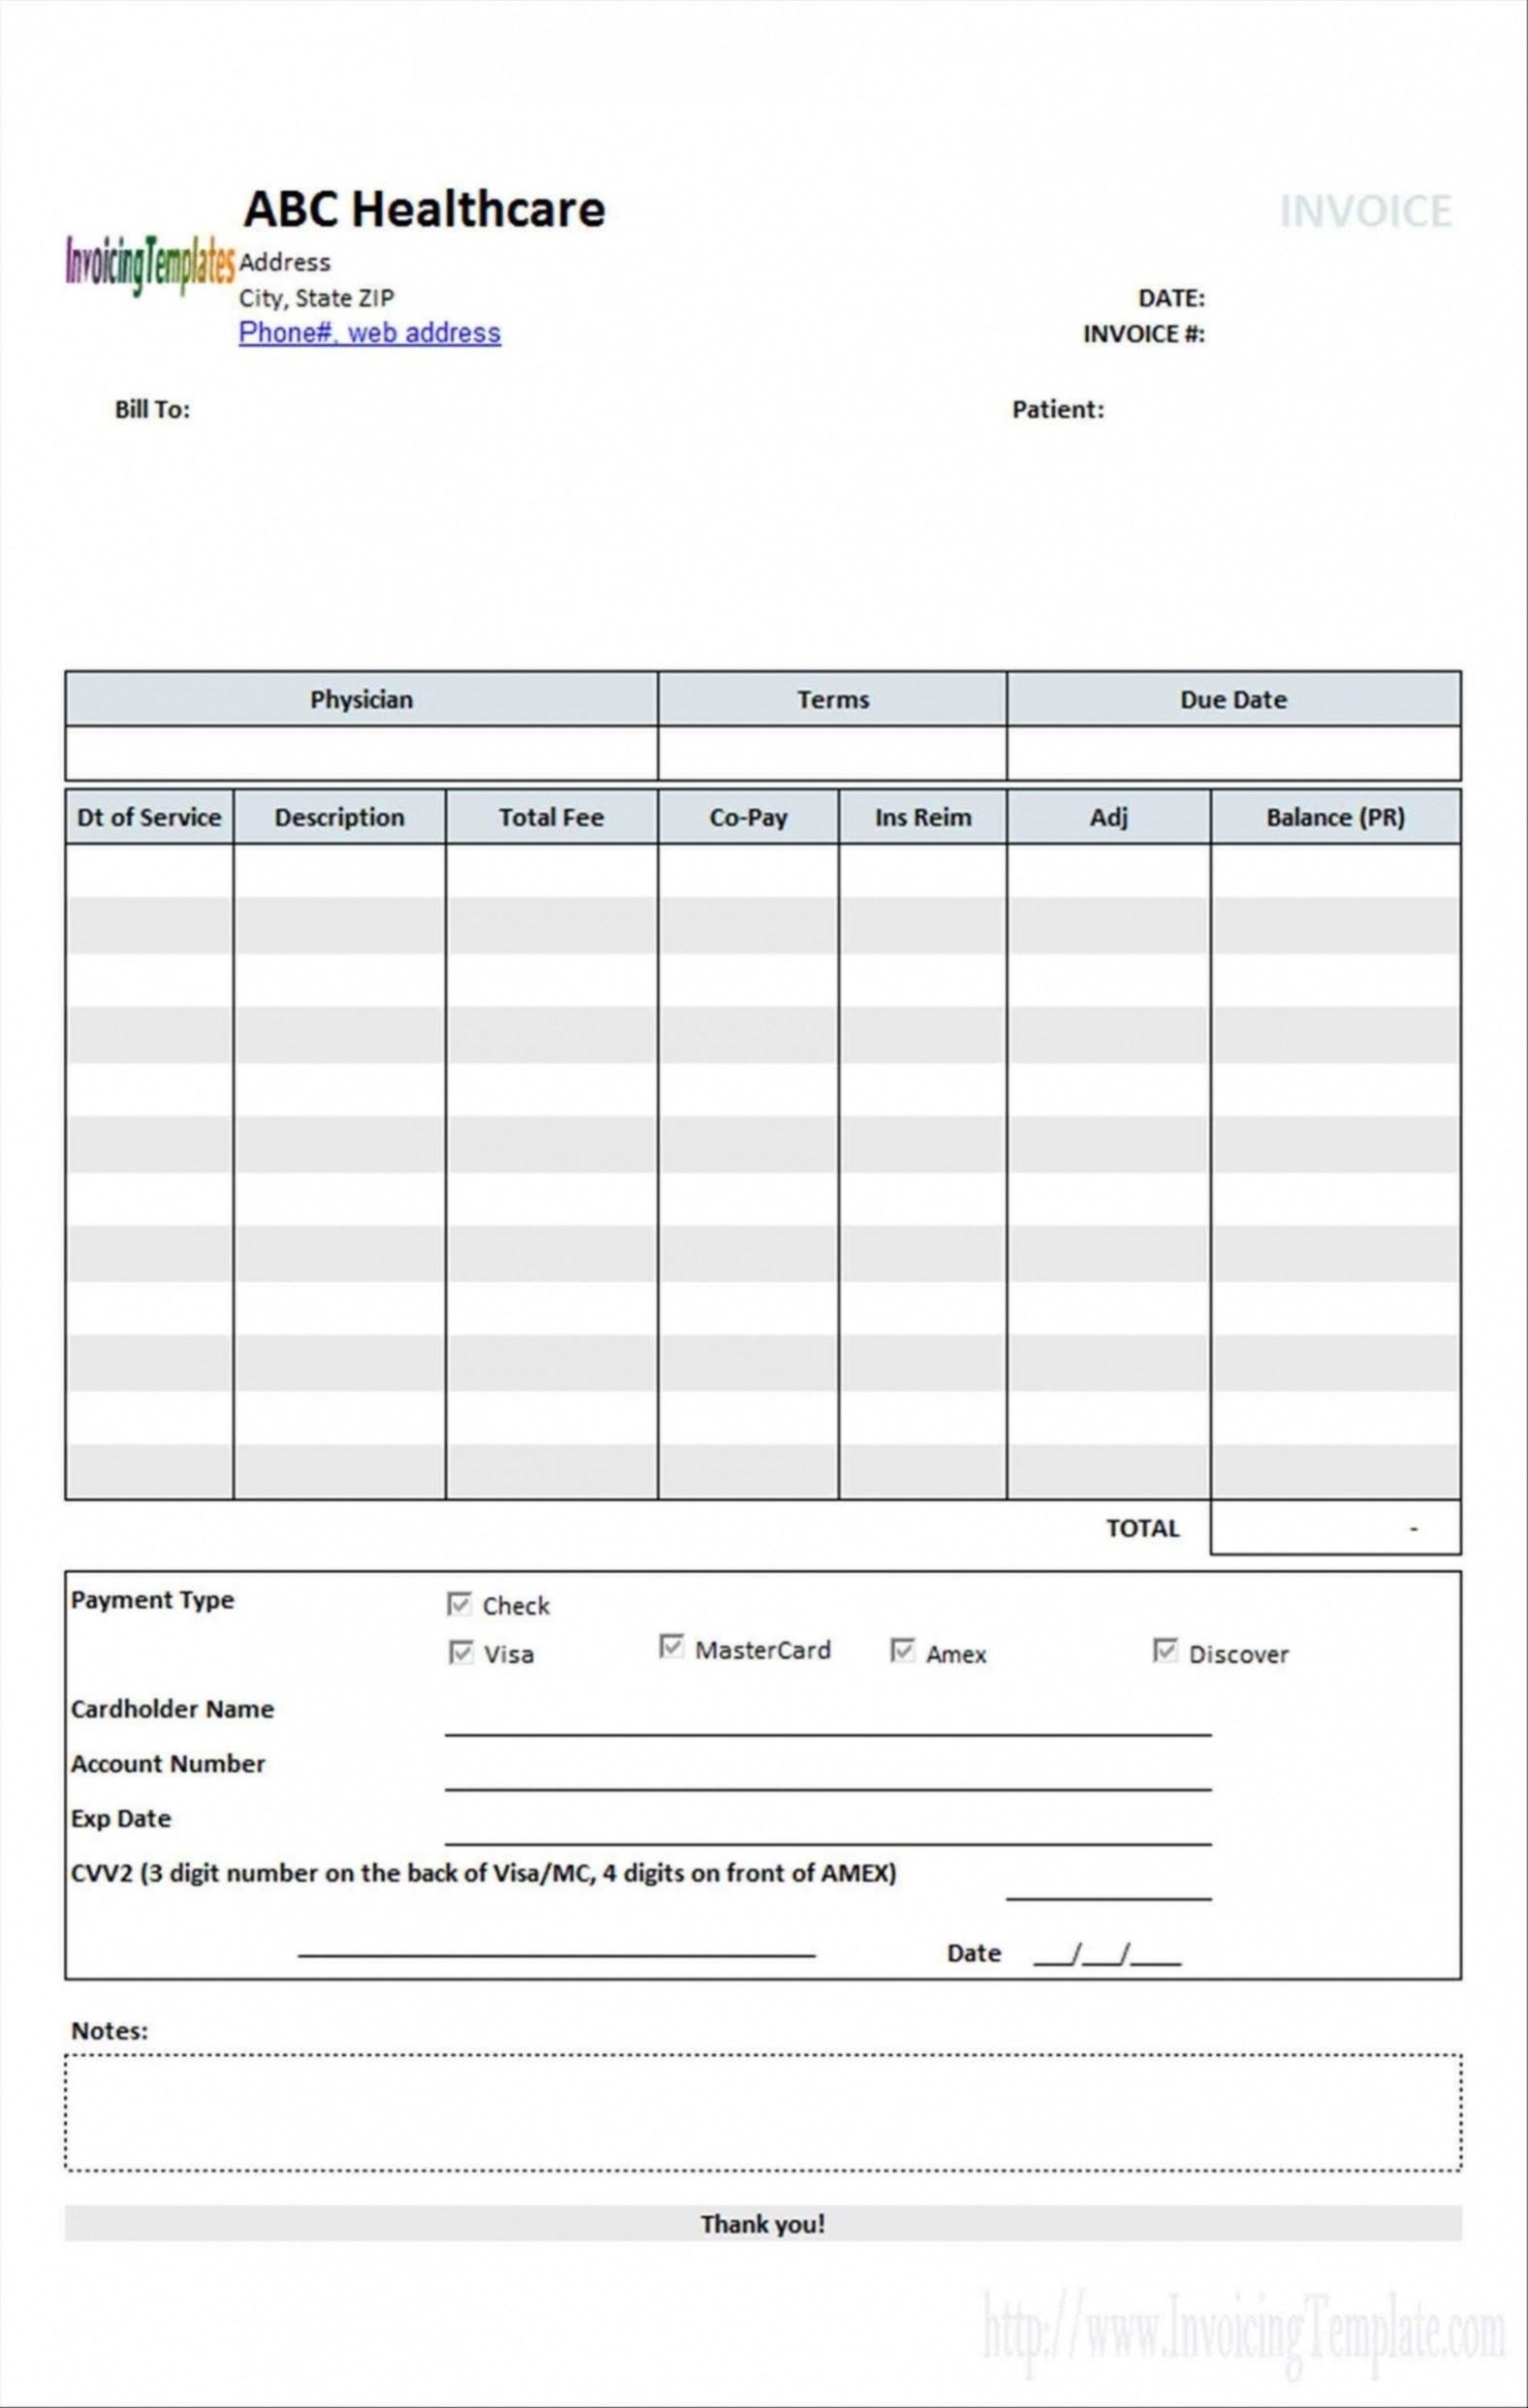 Sample Travel Expense Invoice Template 